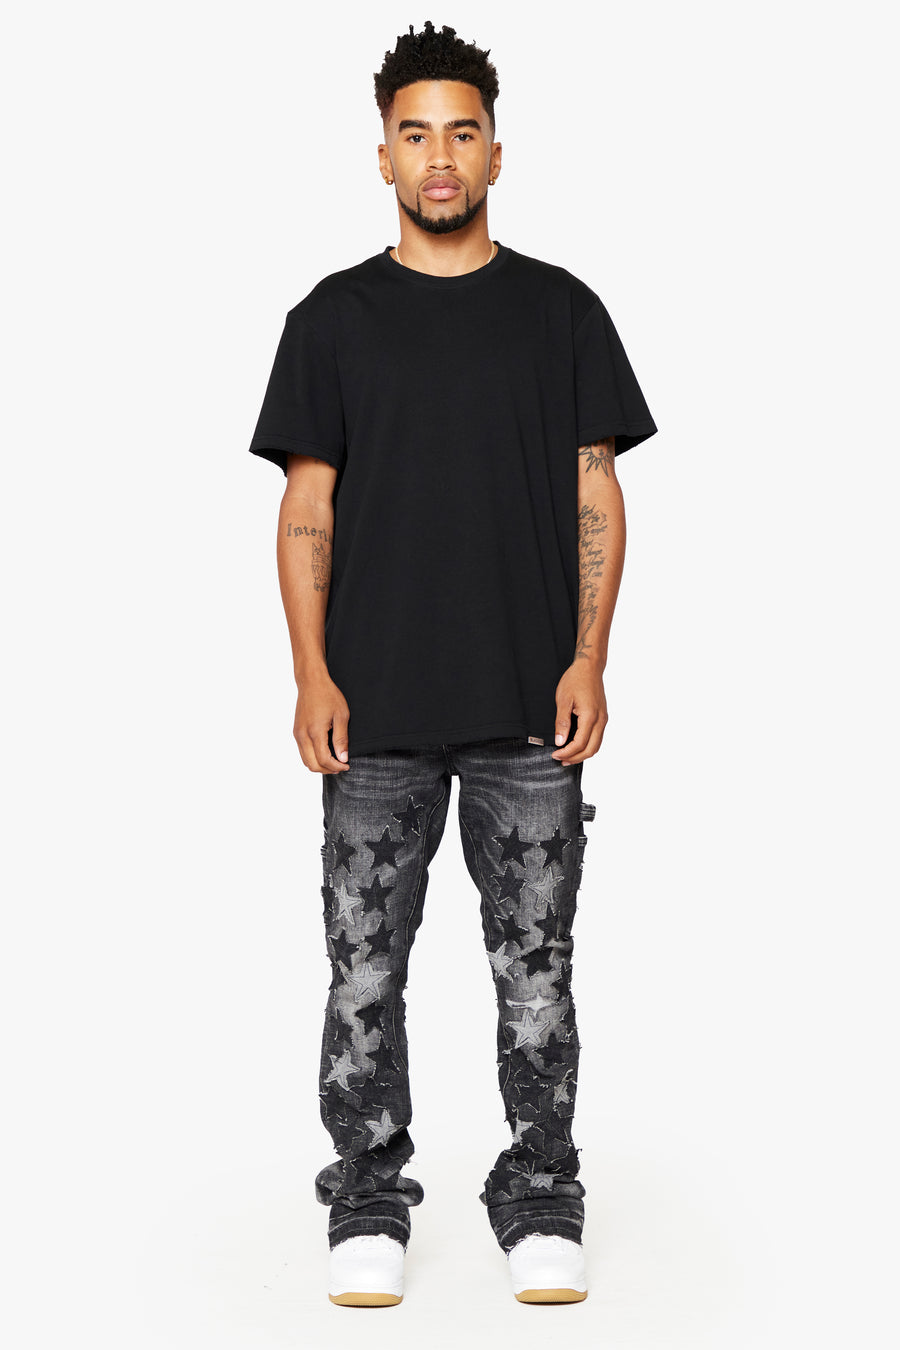 "V-STAR" MARBLED WASH STACKED FLARE JEAN